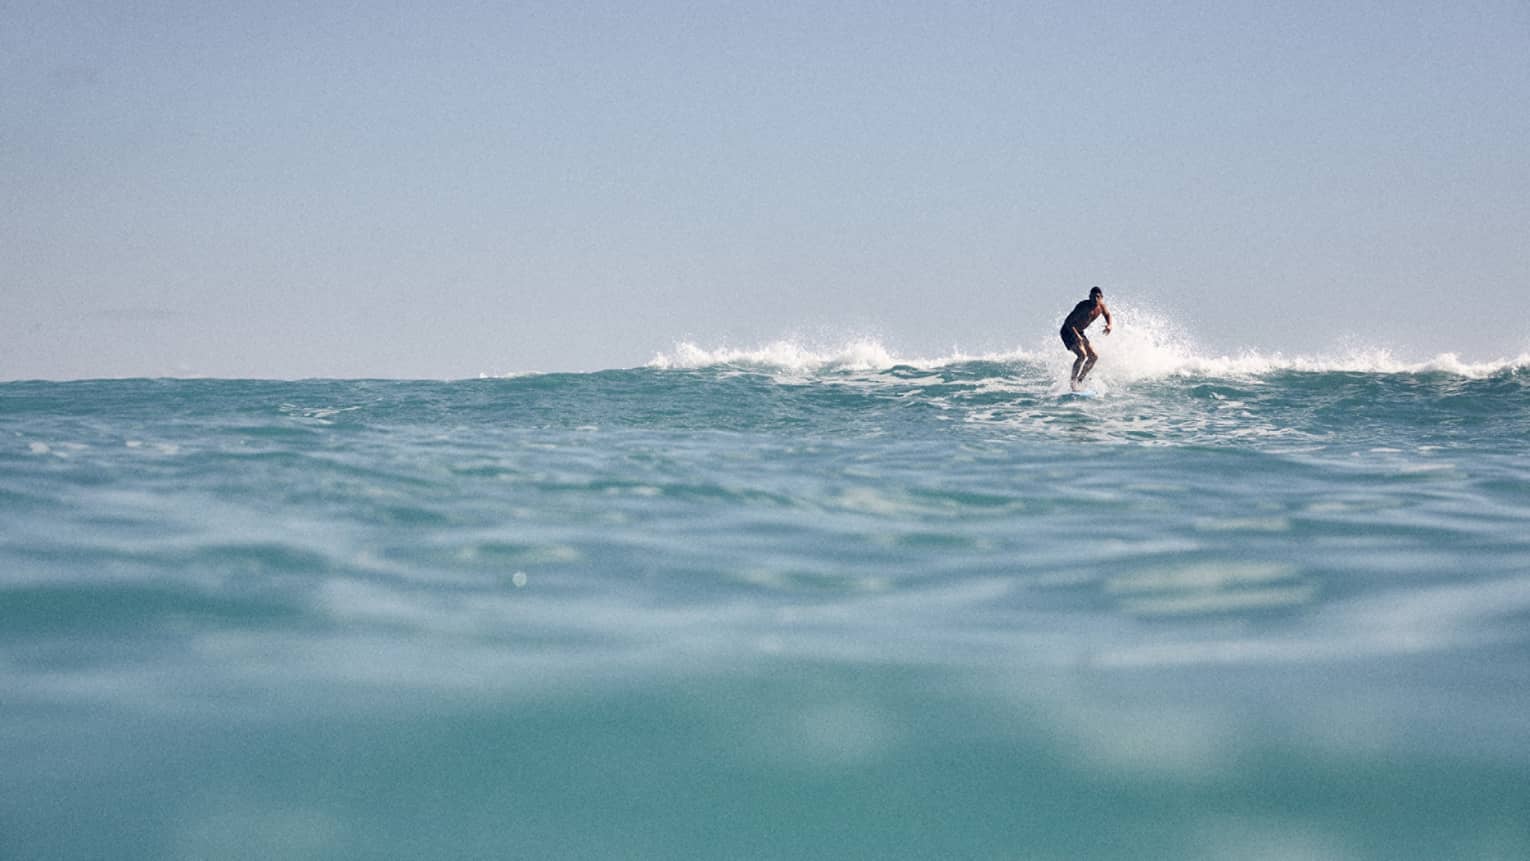 From the water's surface level, view of a man surfing